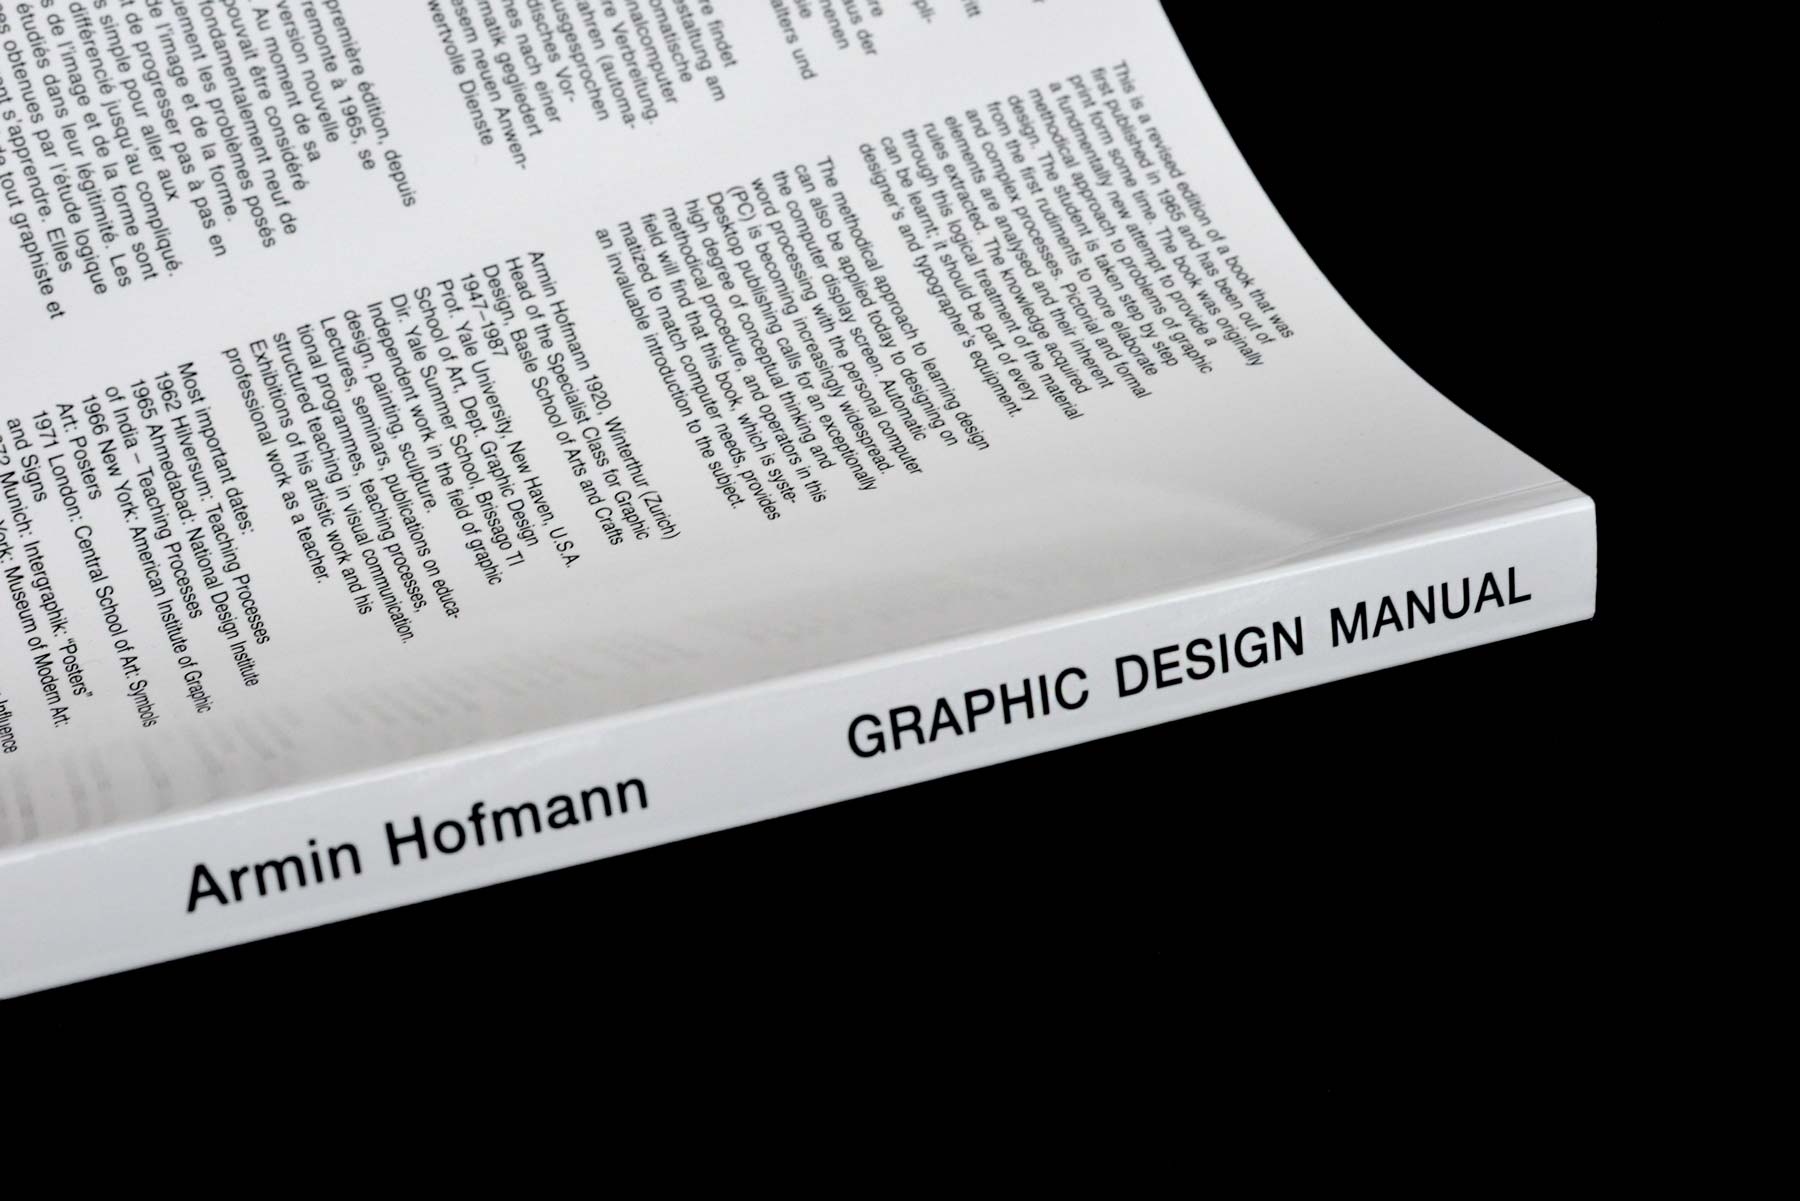 gdfs-library-graphic-design-manual-a